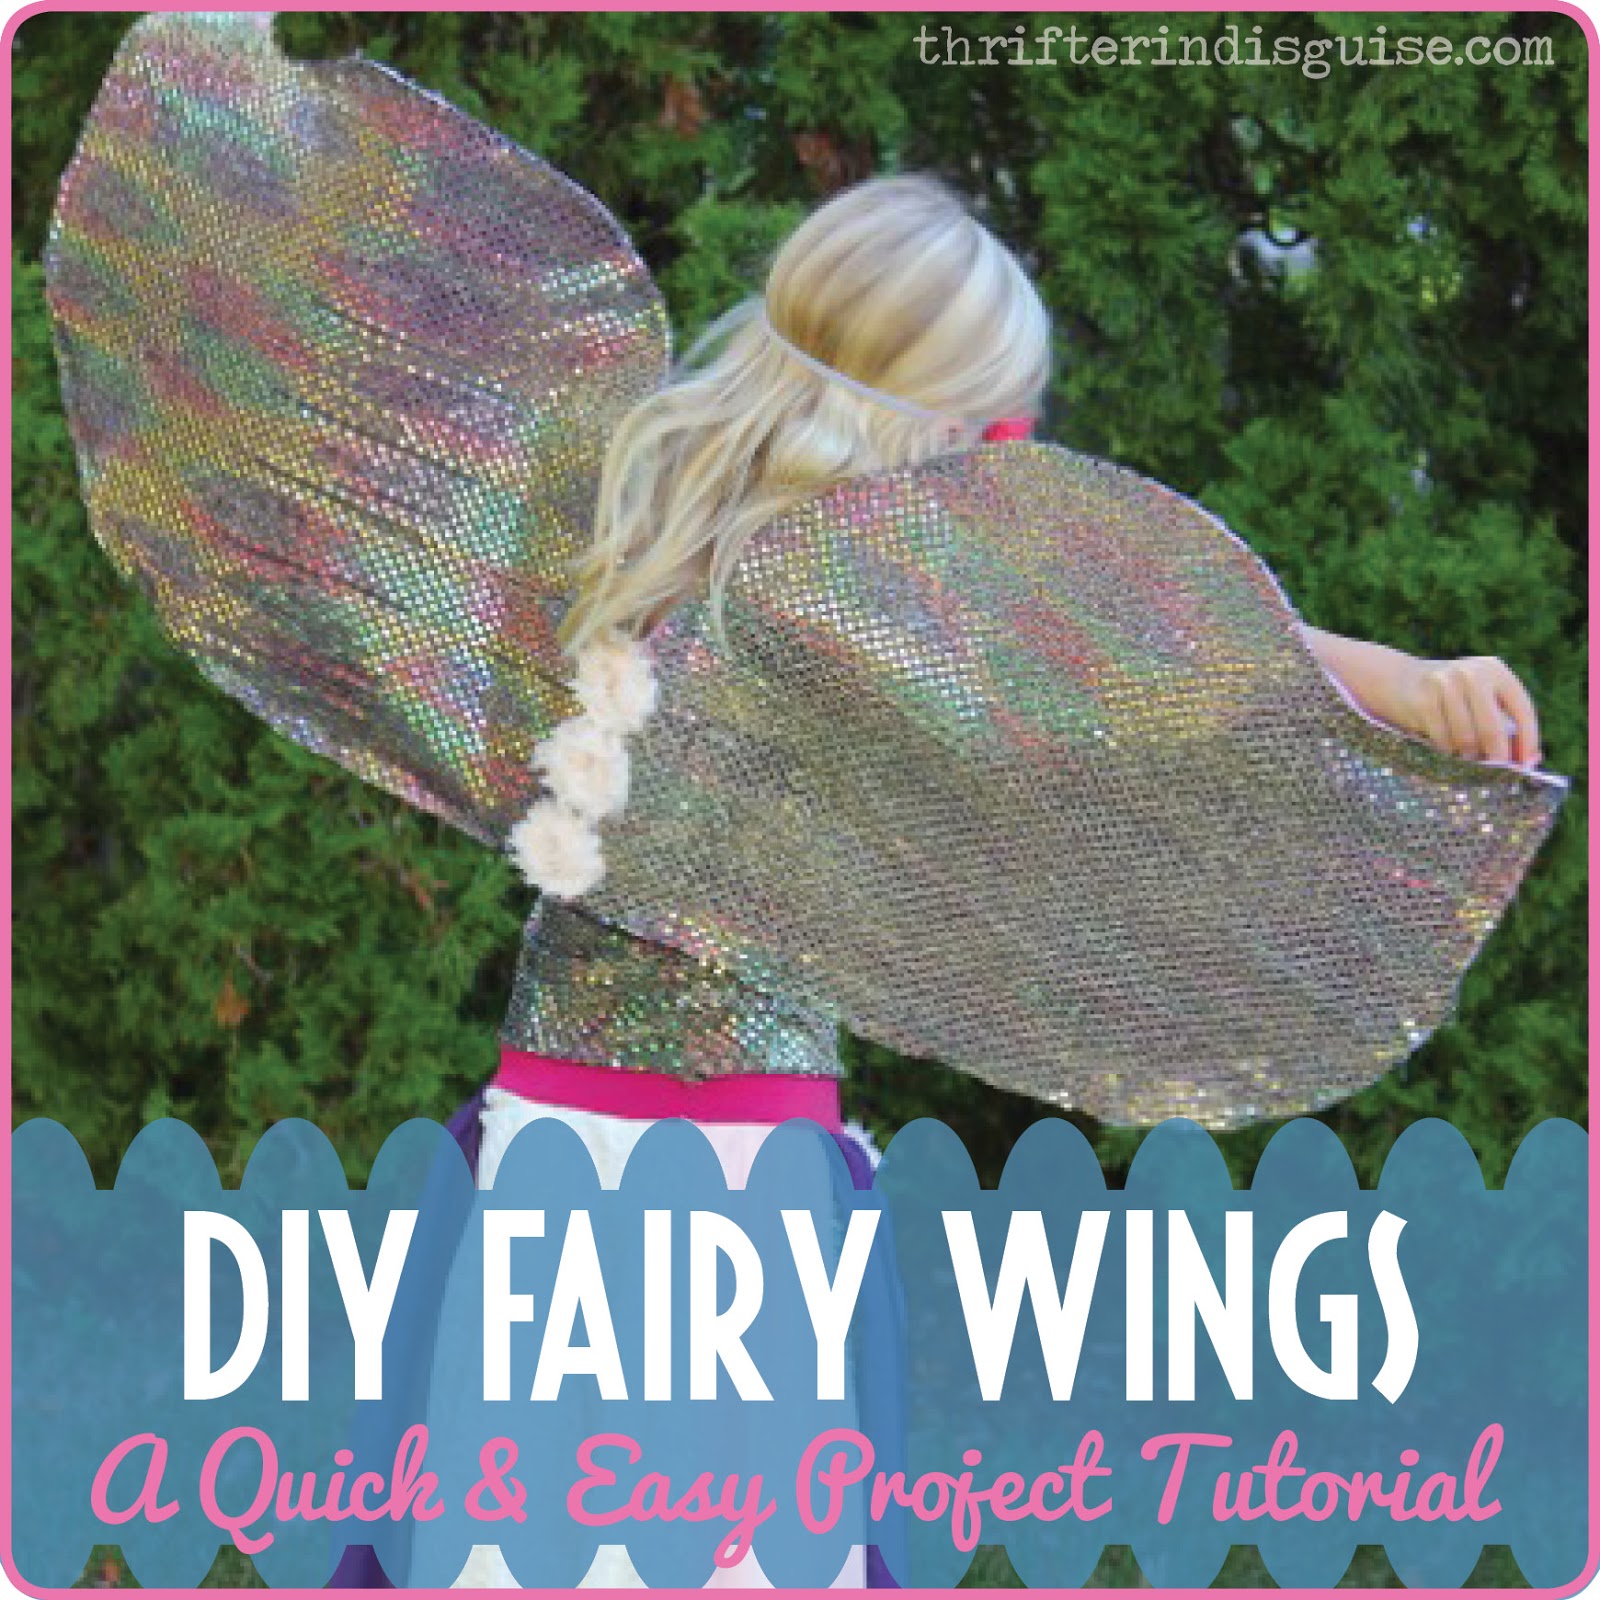 A Thrifter in Disguise: DIY Fairy Wings Costume Tutorial